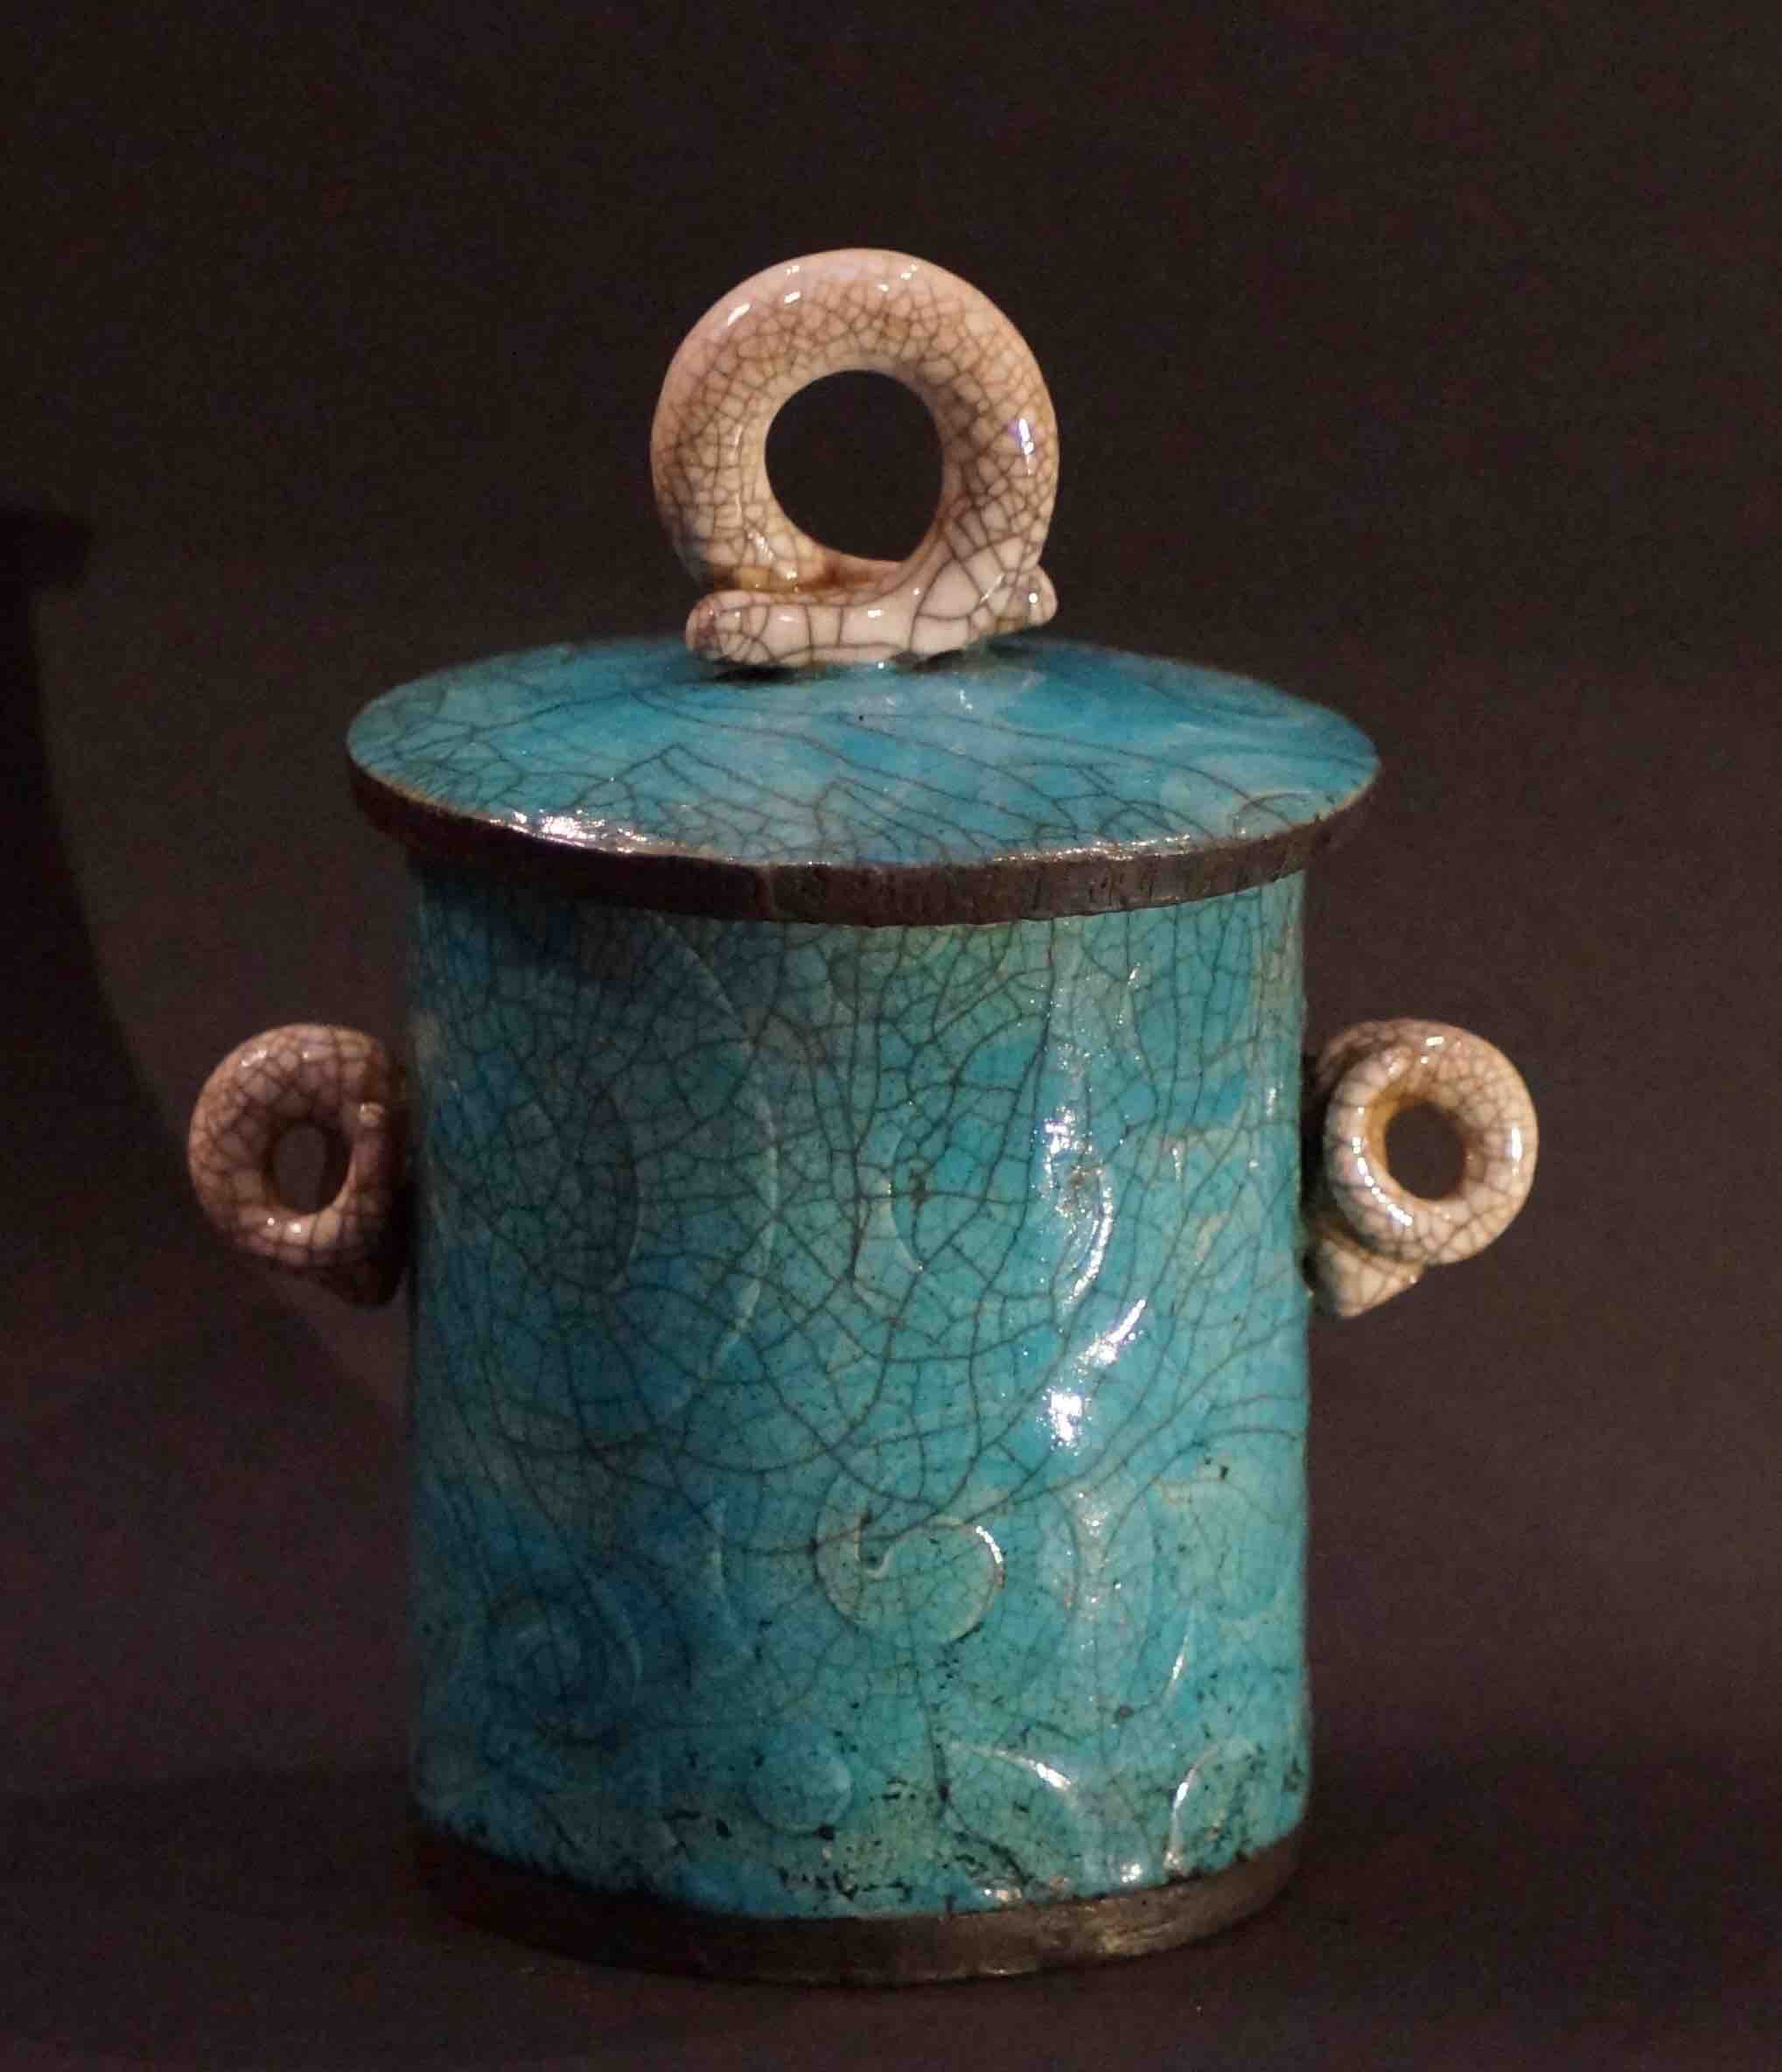 Pot with a lid